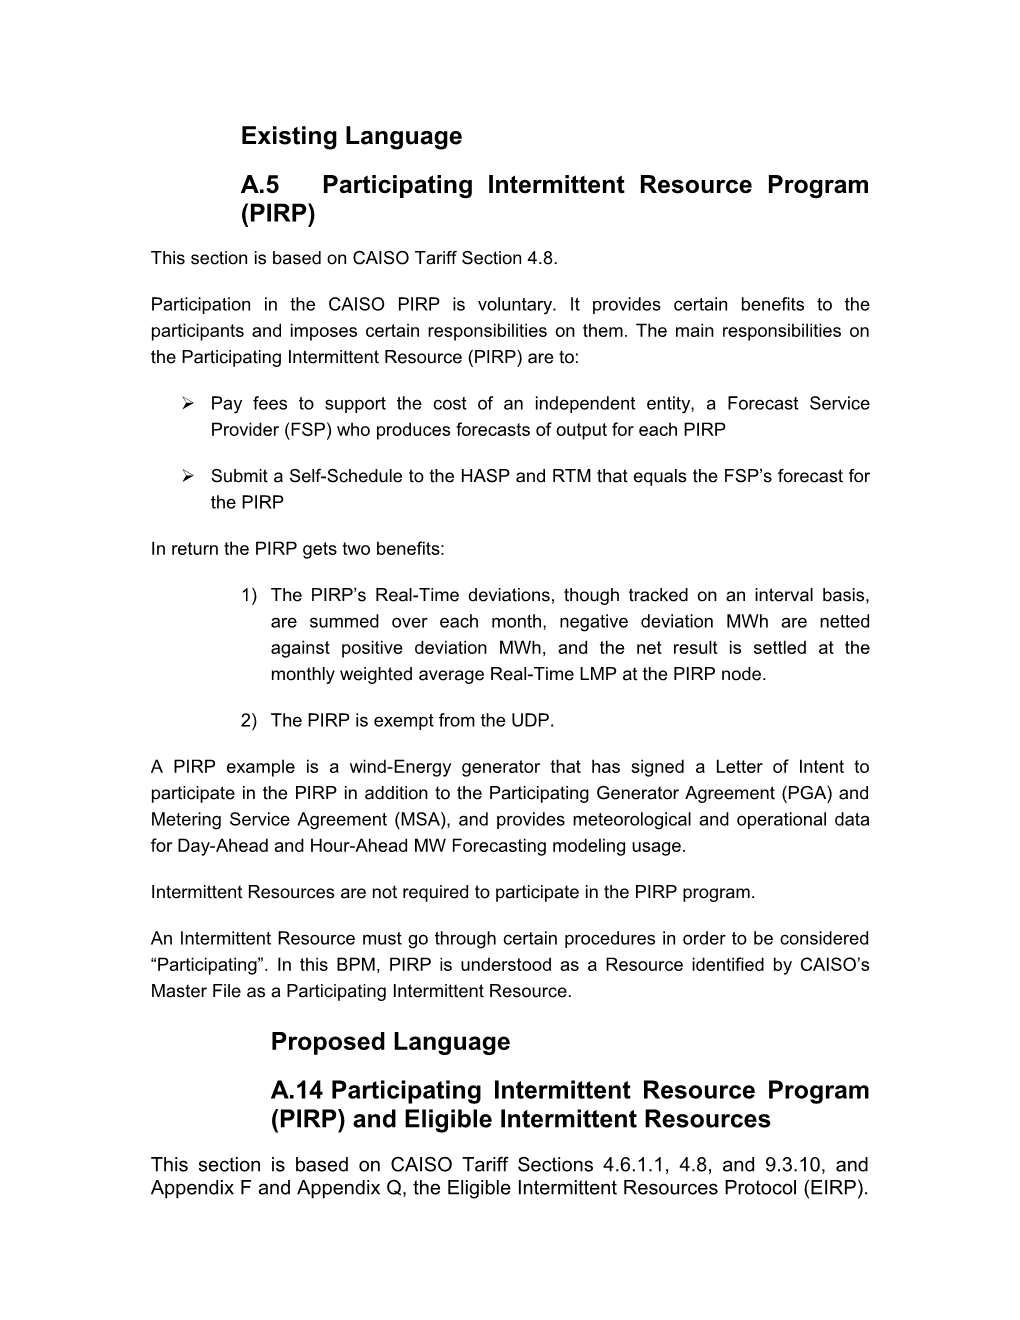 A.5 Participating Intermittent Resource Program (PIRP)